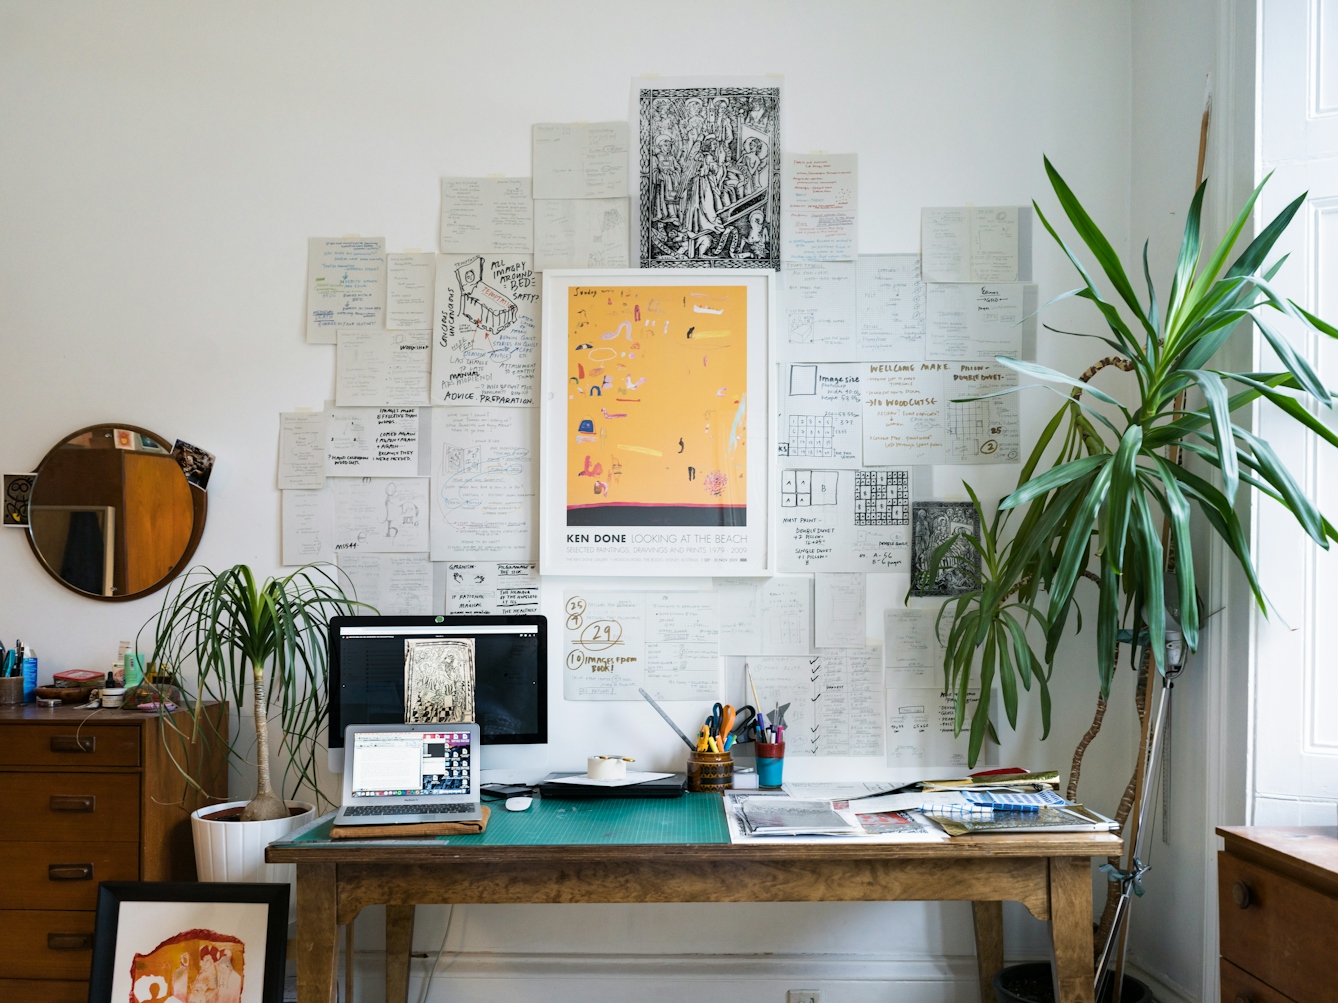 Photograph of a wall covered in pieces of paper which contain sketches and drawings. In front of the wall is a desk on which is a computer screen and laptop, a cutting mat and pen pot holders. Tot he right of the desk is a large pot plant and to the left is a chest of drawers.